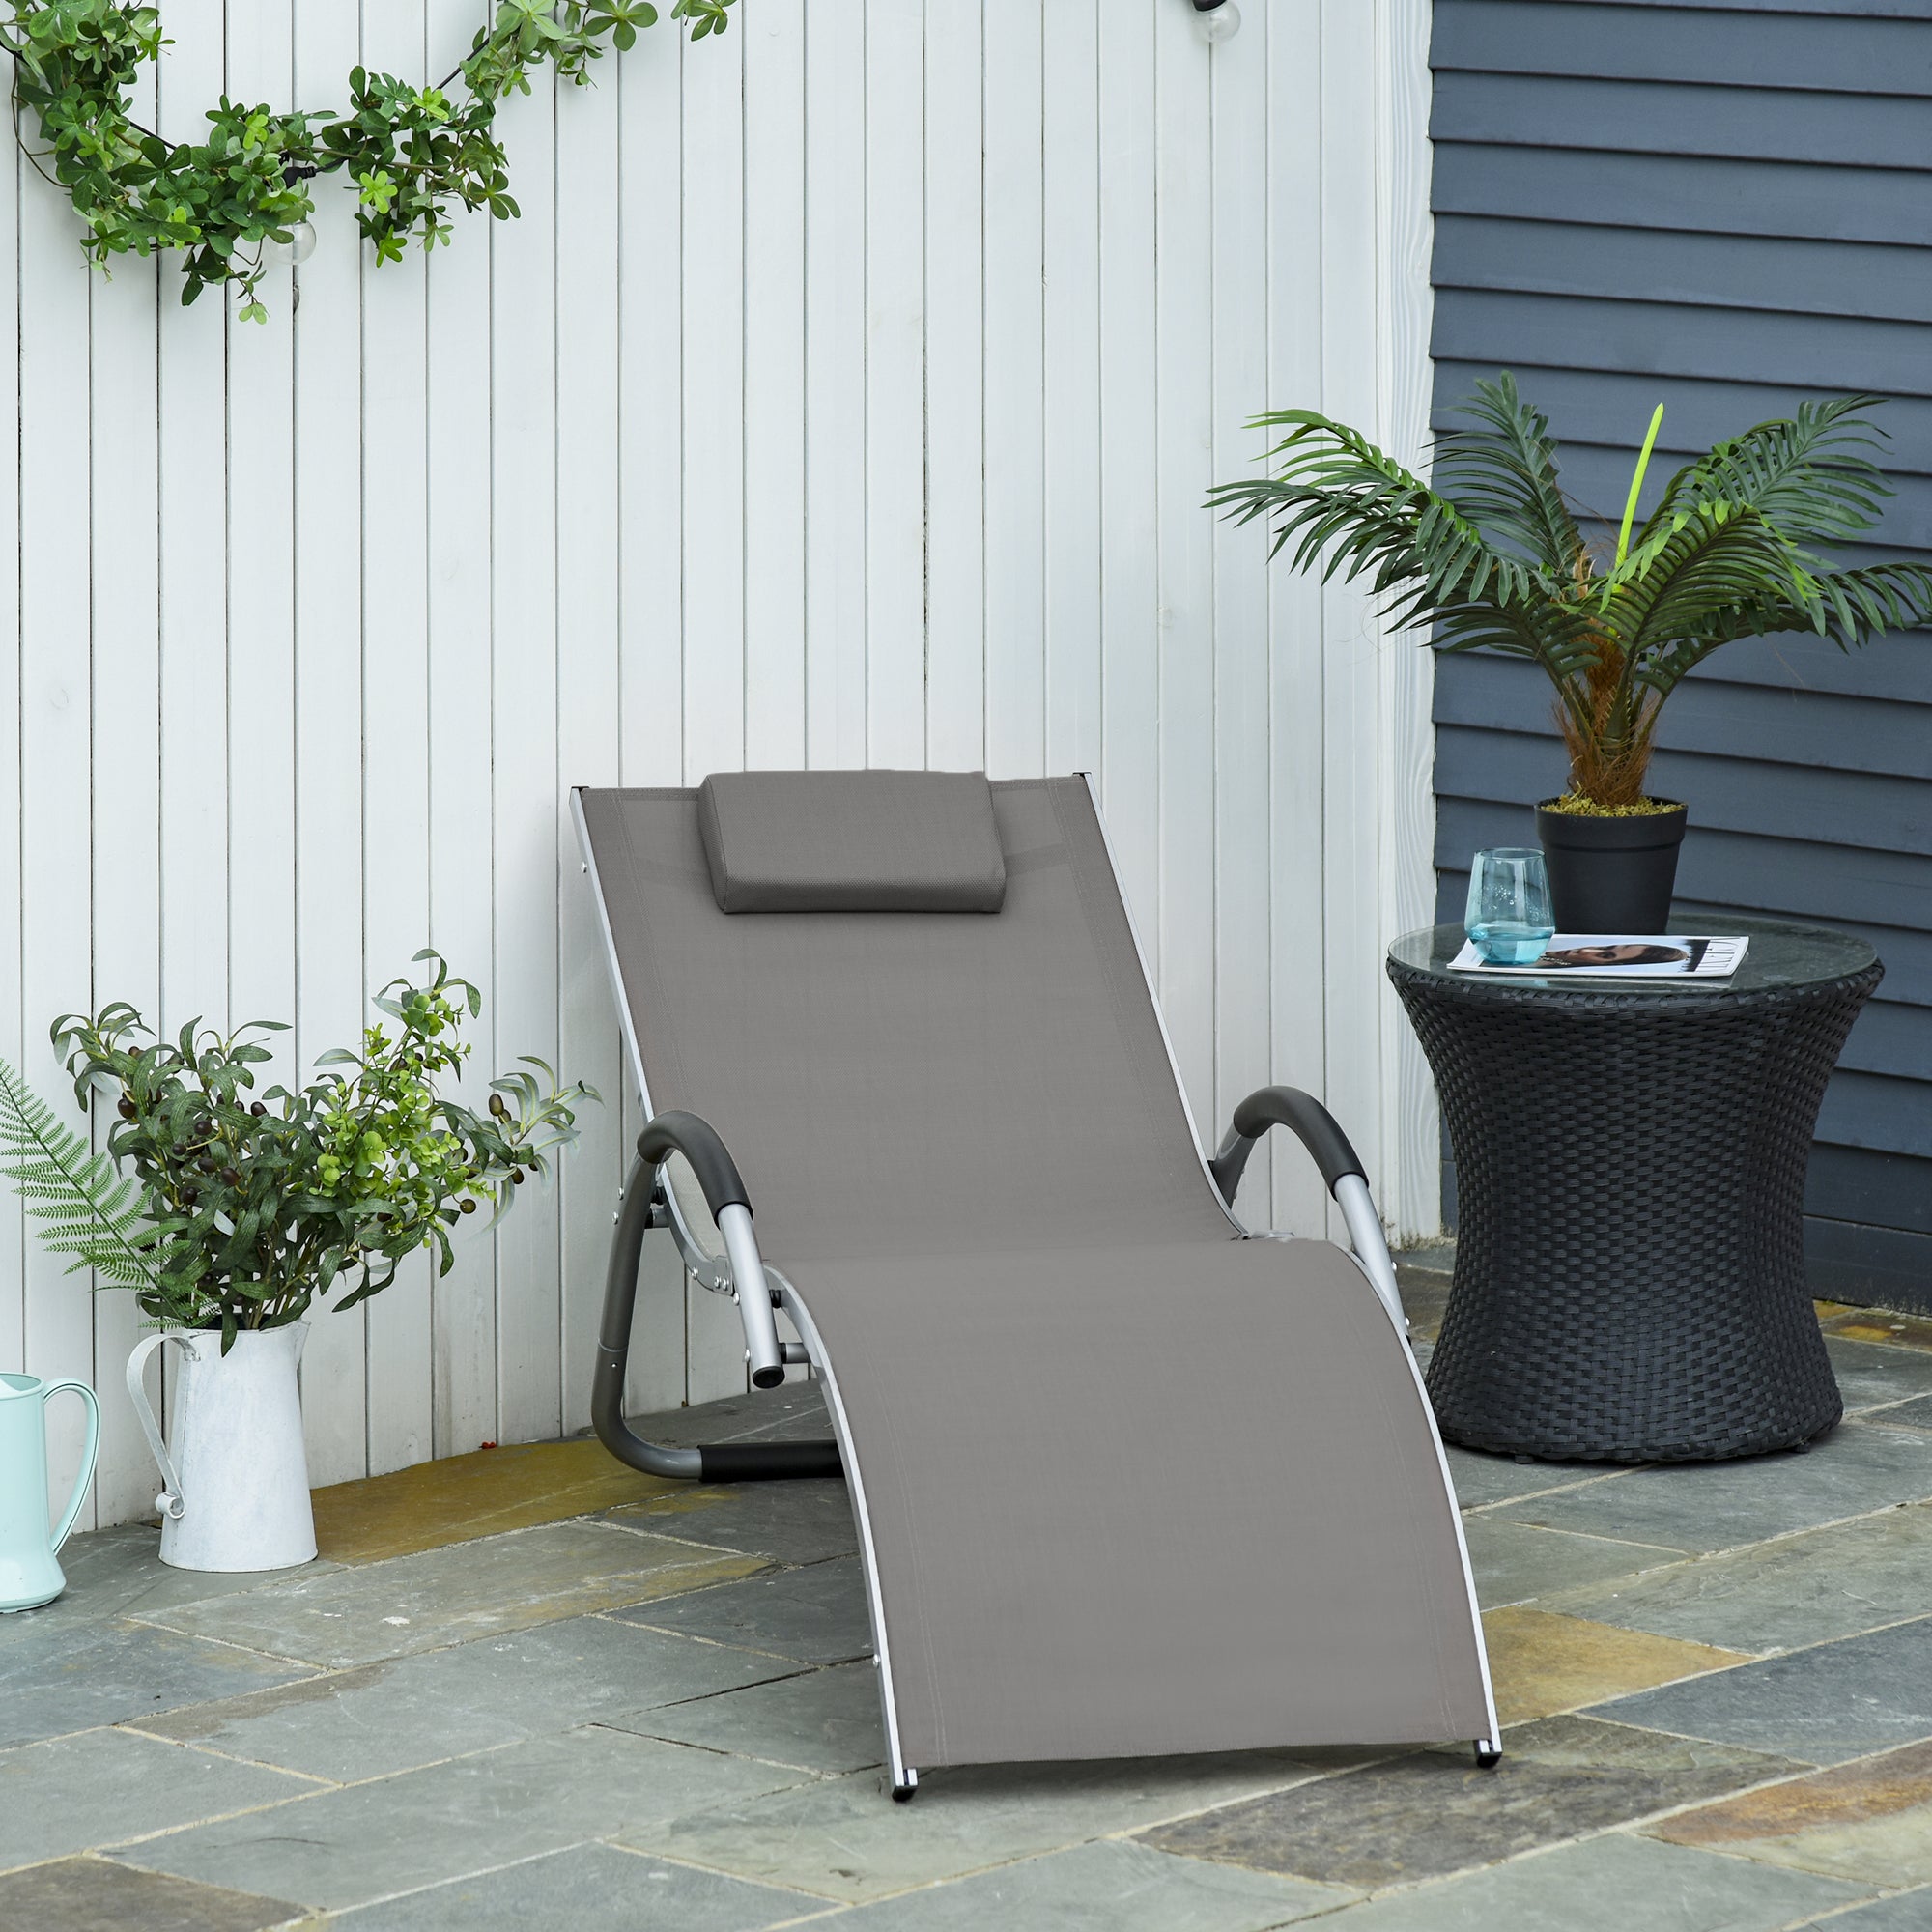 Outsunny Ergonomic Lounger Chair Portable Armchair with Removable Headrest Pillow for Garden Patio Outside All Aluminium Frame Khaki - Inspirely